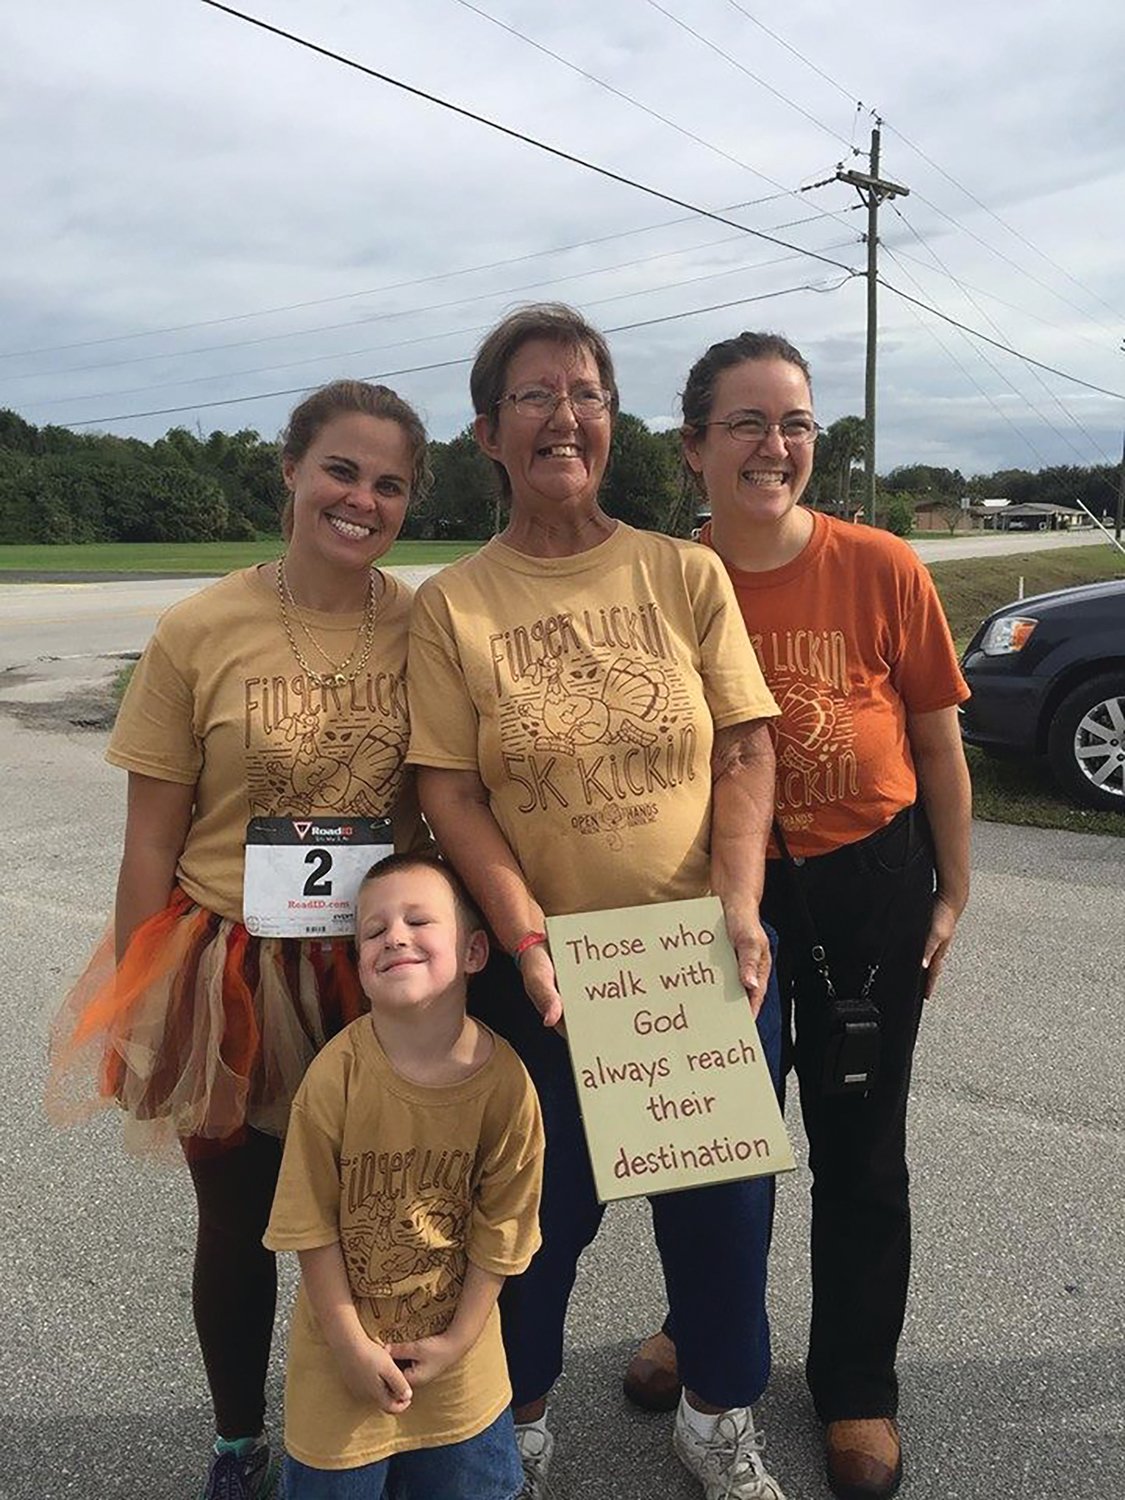 Tyna Futch (center) walked the 2016 Open Hands 5K just three months after coming out of a coma. She is pictured with Open Hands’ founder Nicole Talley (left), physician’s assistant Stacie Pasquarella and Ryan, one of Futch’s grandsons.